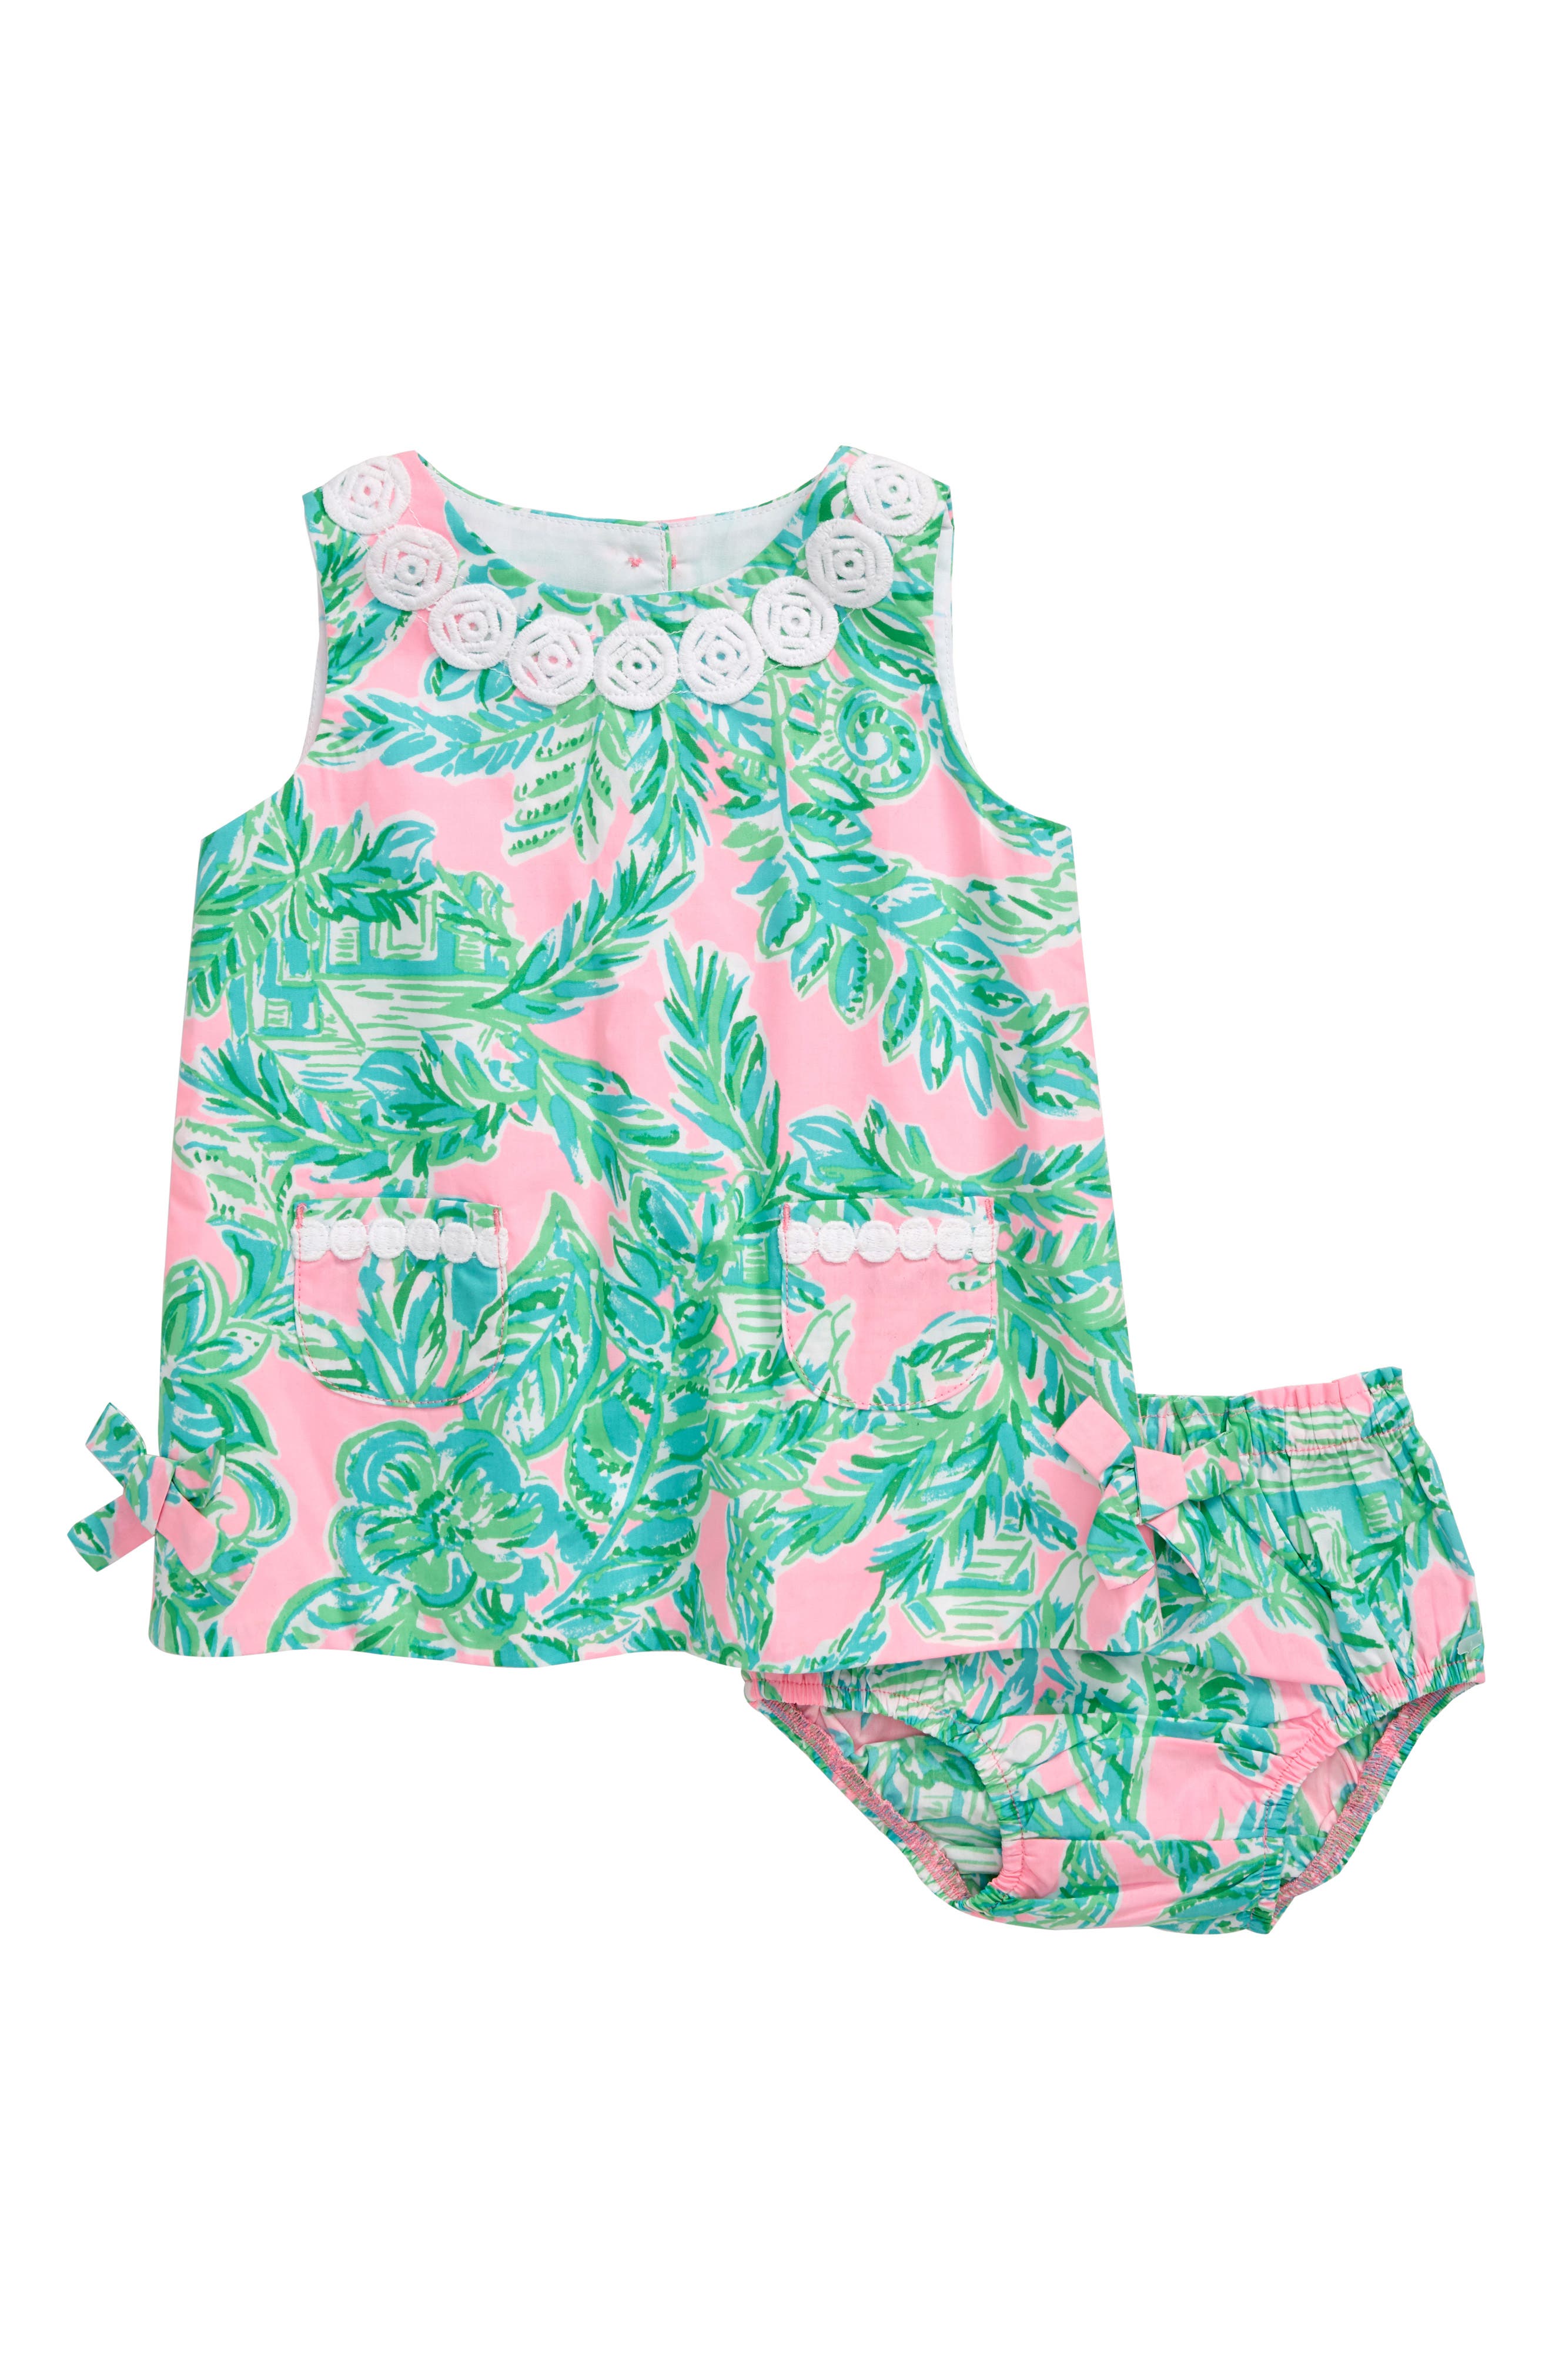 lilly pulitzer at nordstrom